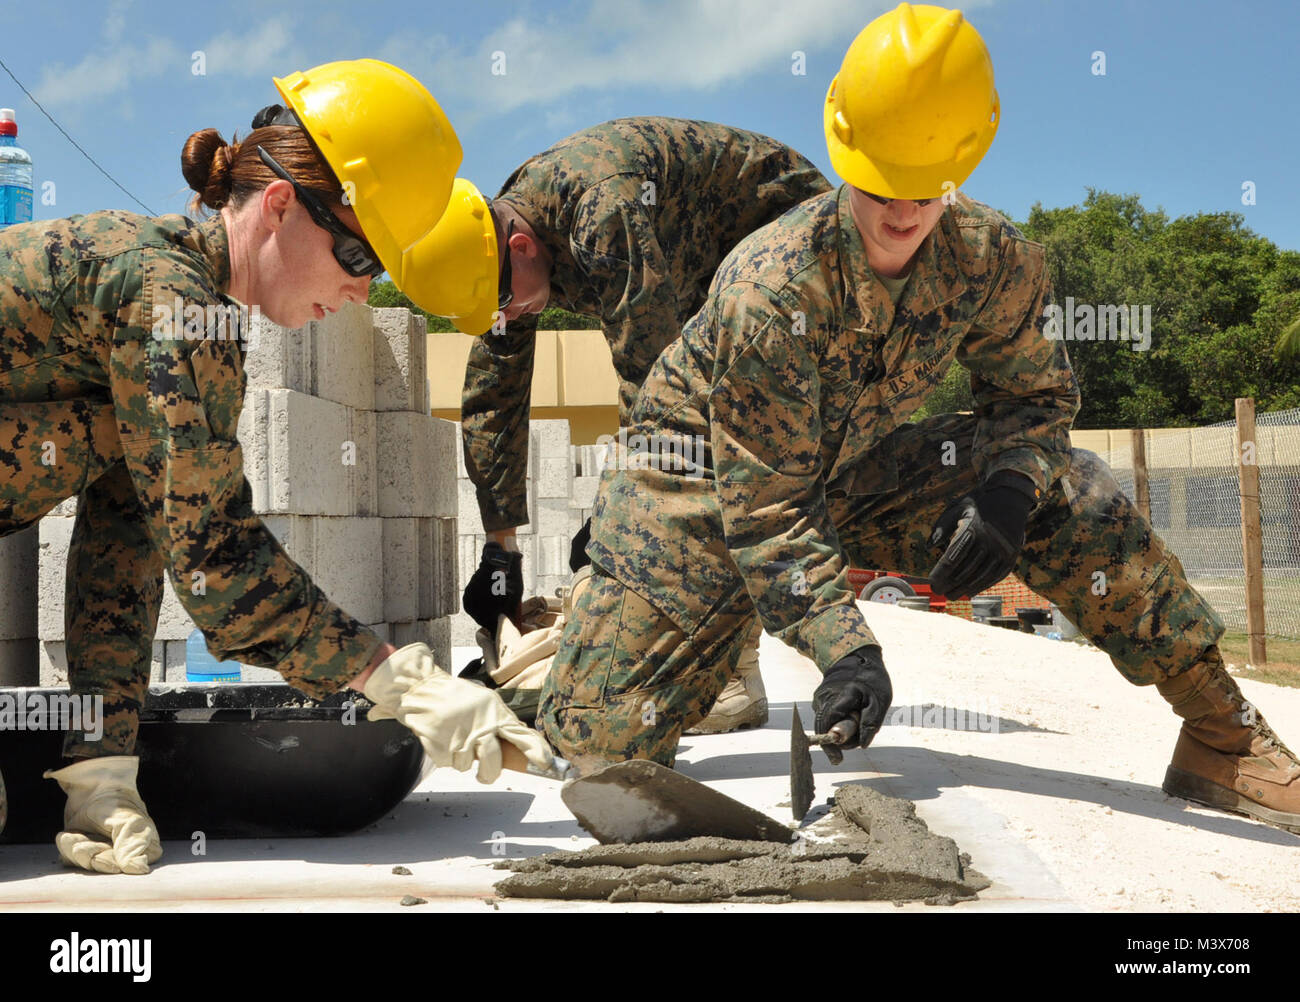 U.S. Marine Corps Cpl. Melissa Baker, left, and Lance Cpl. David Cafarelli, right, Marine Wing Support Squadron 472, prepare a corner of the Edward P. Yorke school construction site to lay block March 31, 2014, in Belize City, Belize. Marines from MWSS-472 will work side by side with engineers from the Belizean Defence Force to provide an additional classroom to the Yorke school. The construction is part of New Horizons Belize 2014, an exercise to build partnerships and learn from one another in construction and medical realms. (U.S. Air Force photo by Tech. Sgt. Kali L. Gradishar/Released) U. Stock Photo